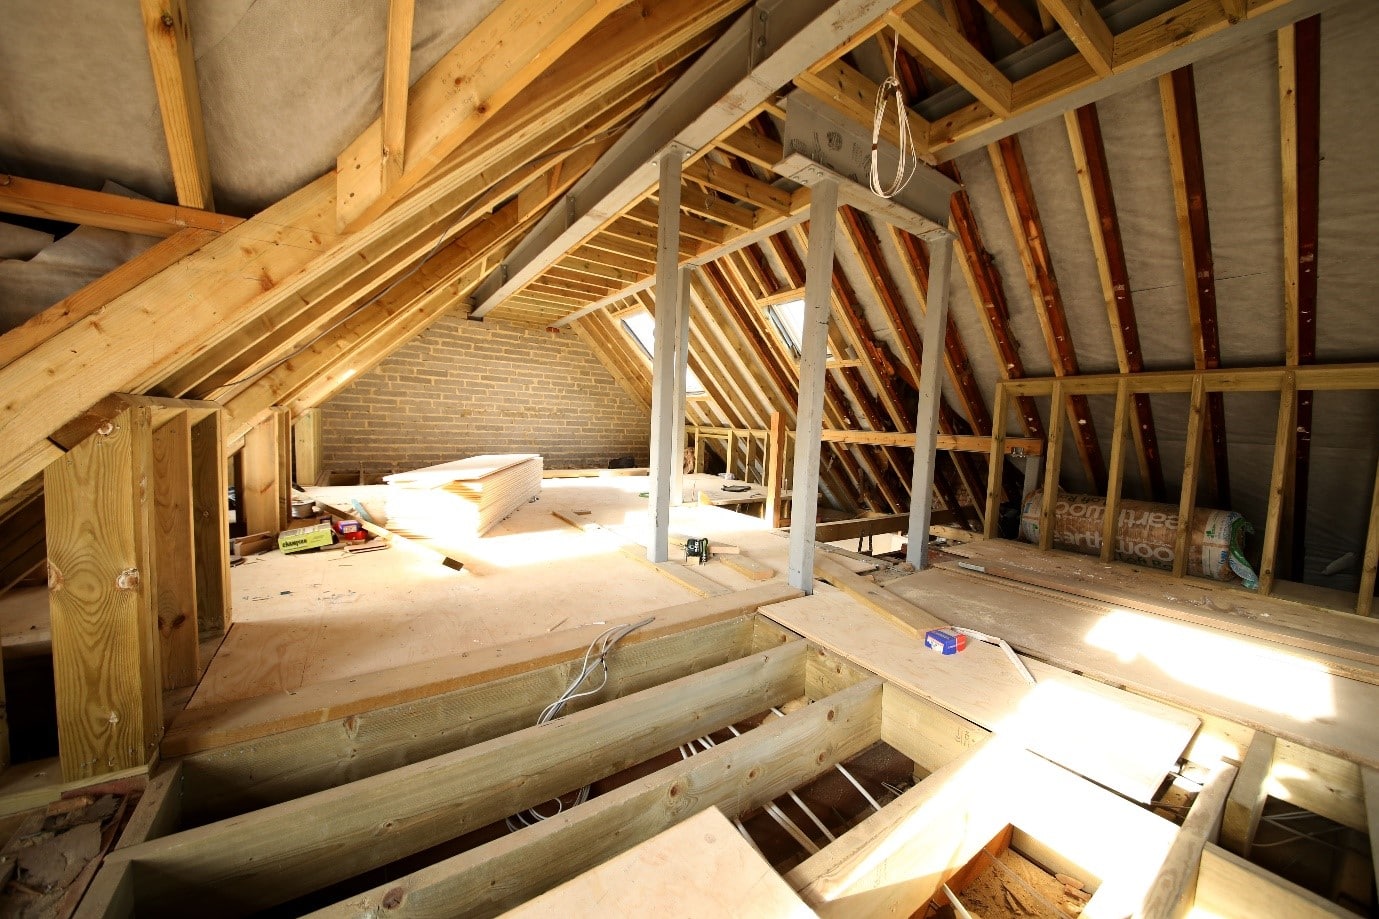 How To Plan A Loft Conversion From Start To Finish - LMB Group